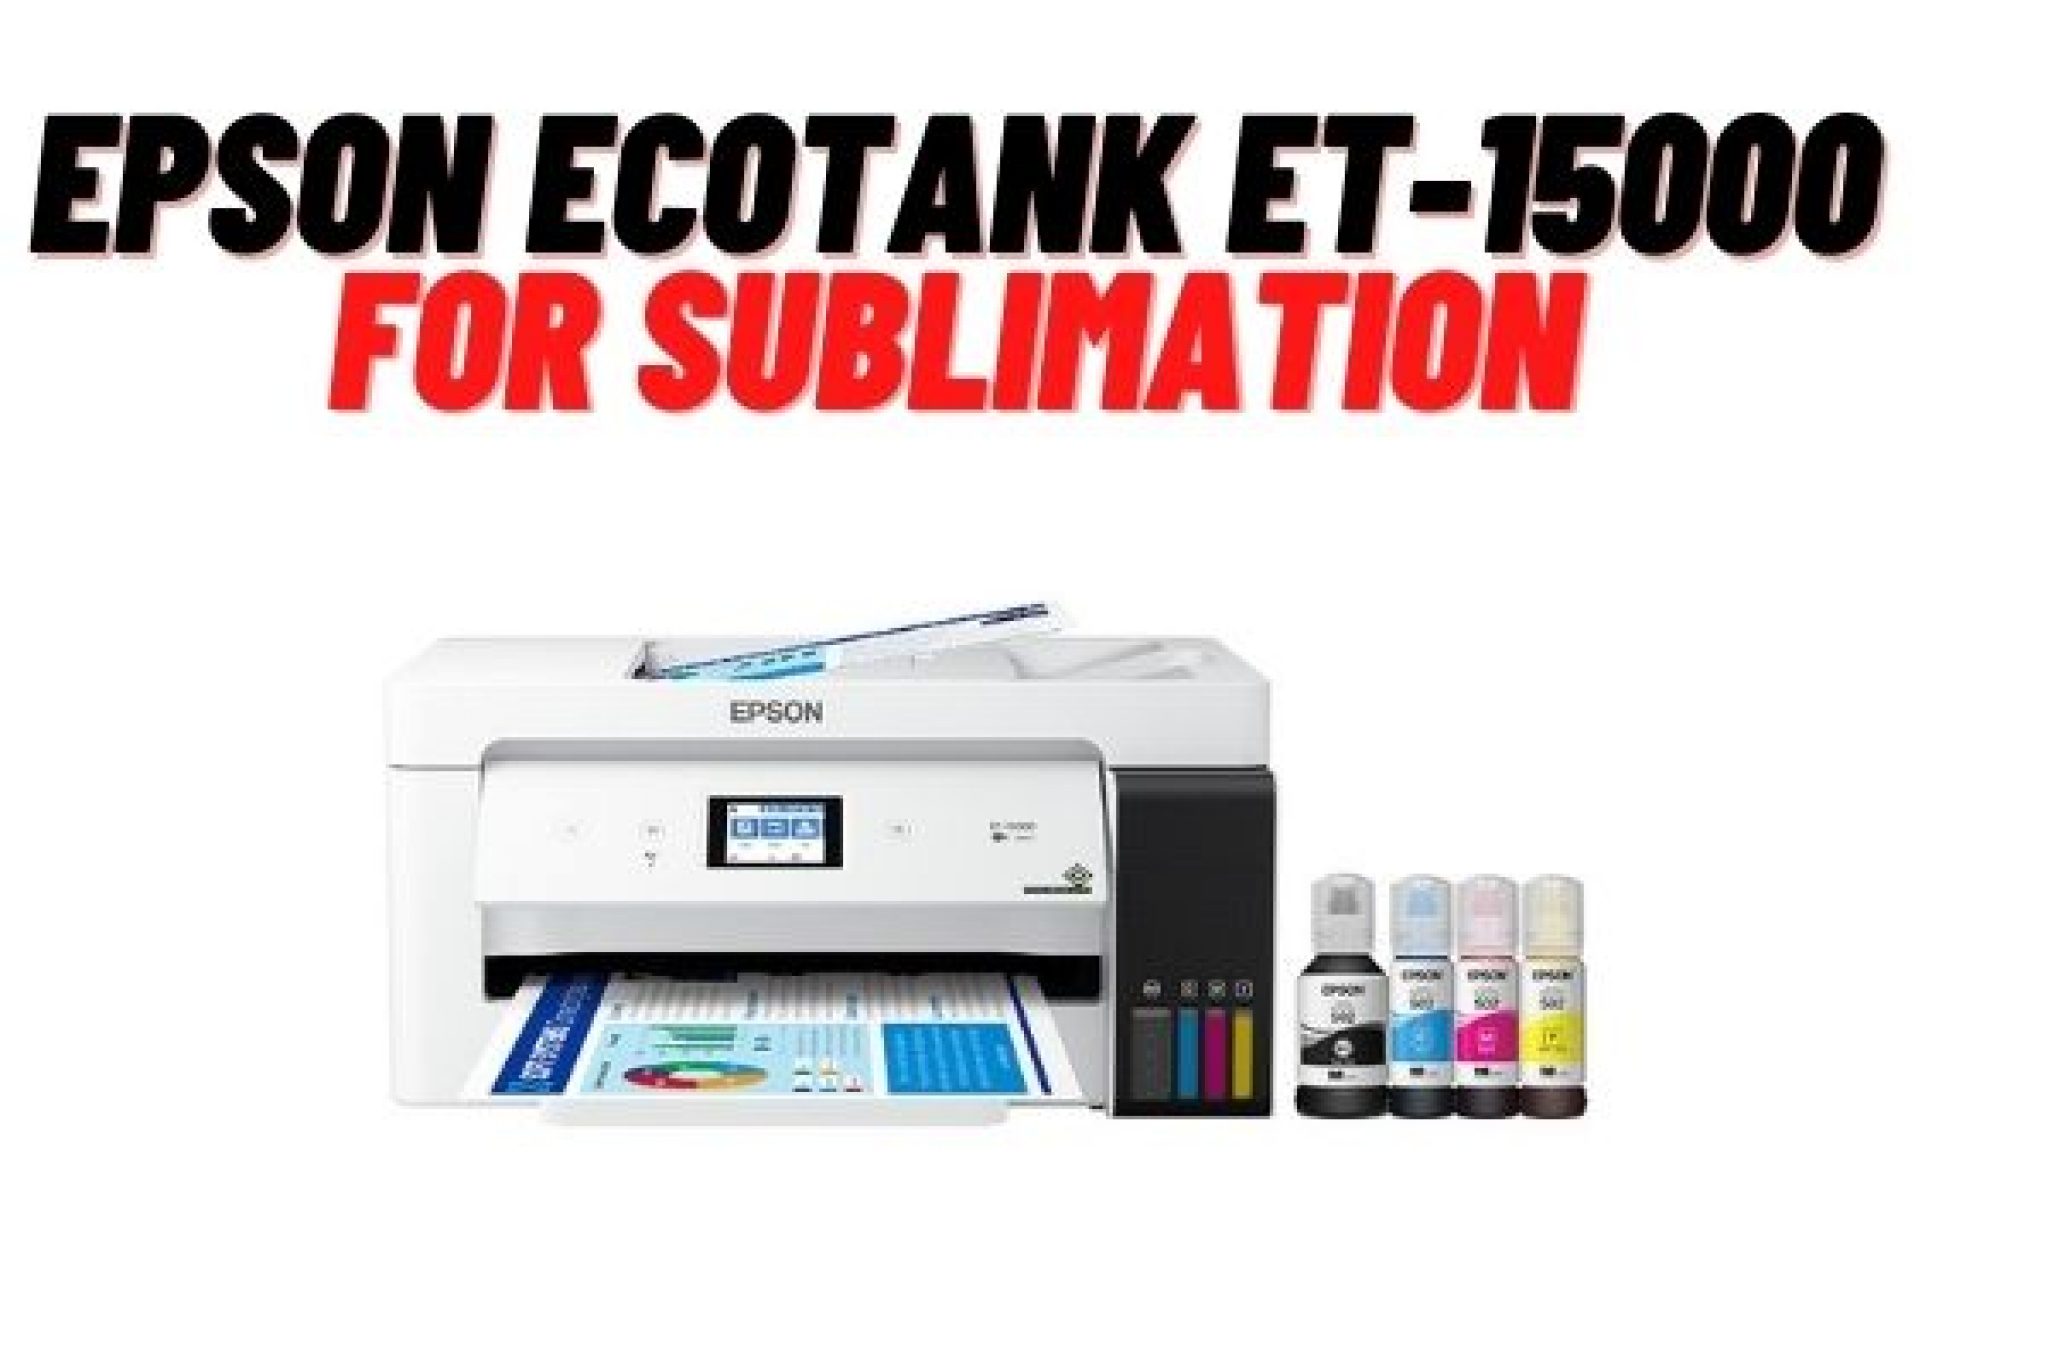 Epson Ecotank Et 15000 For Sublimation Printing Buyers Guide 7369